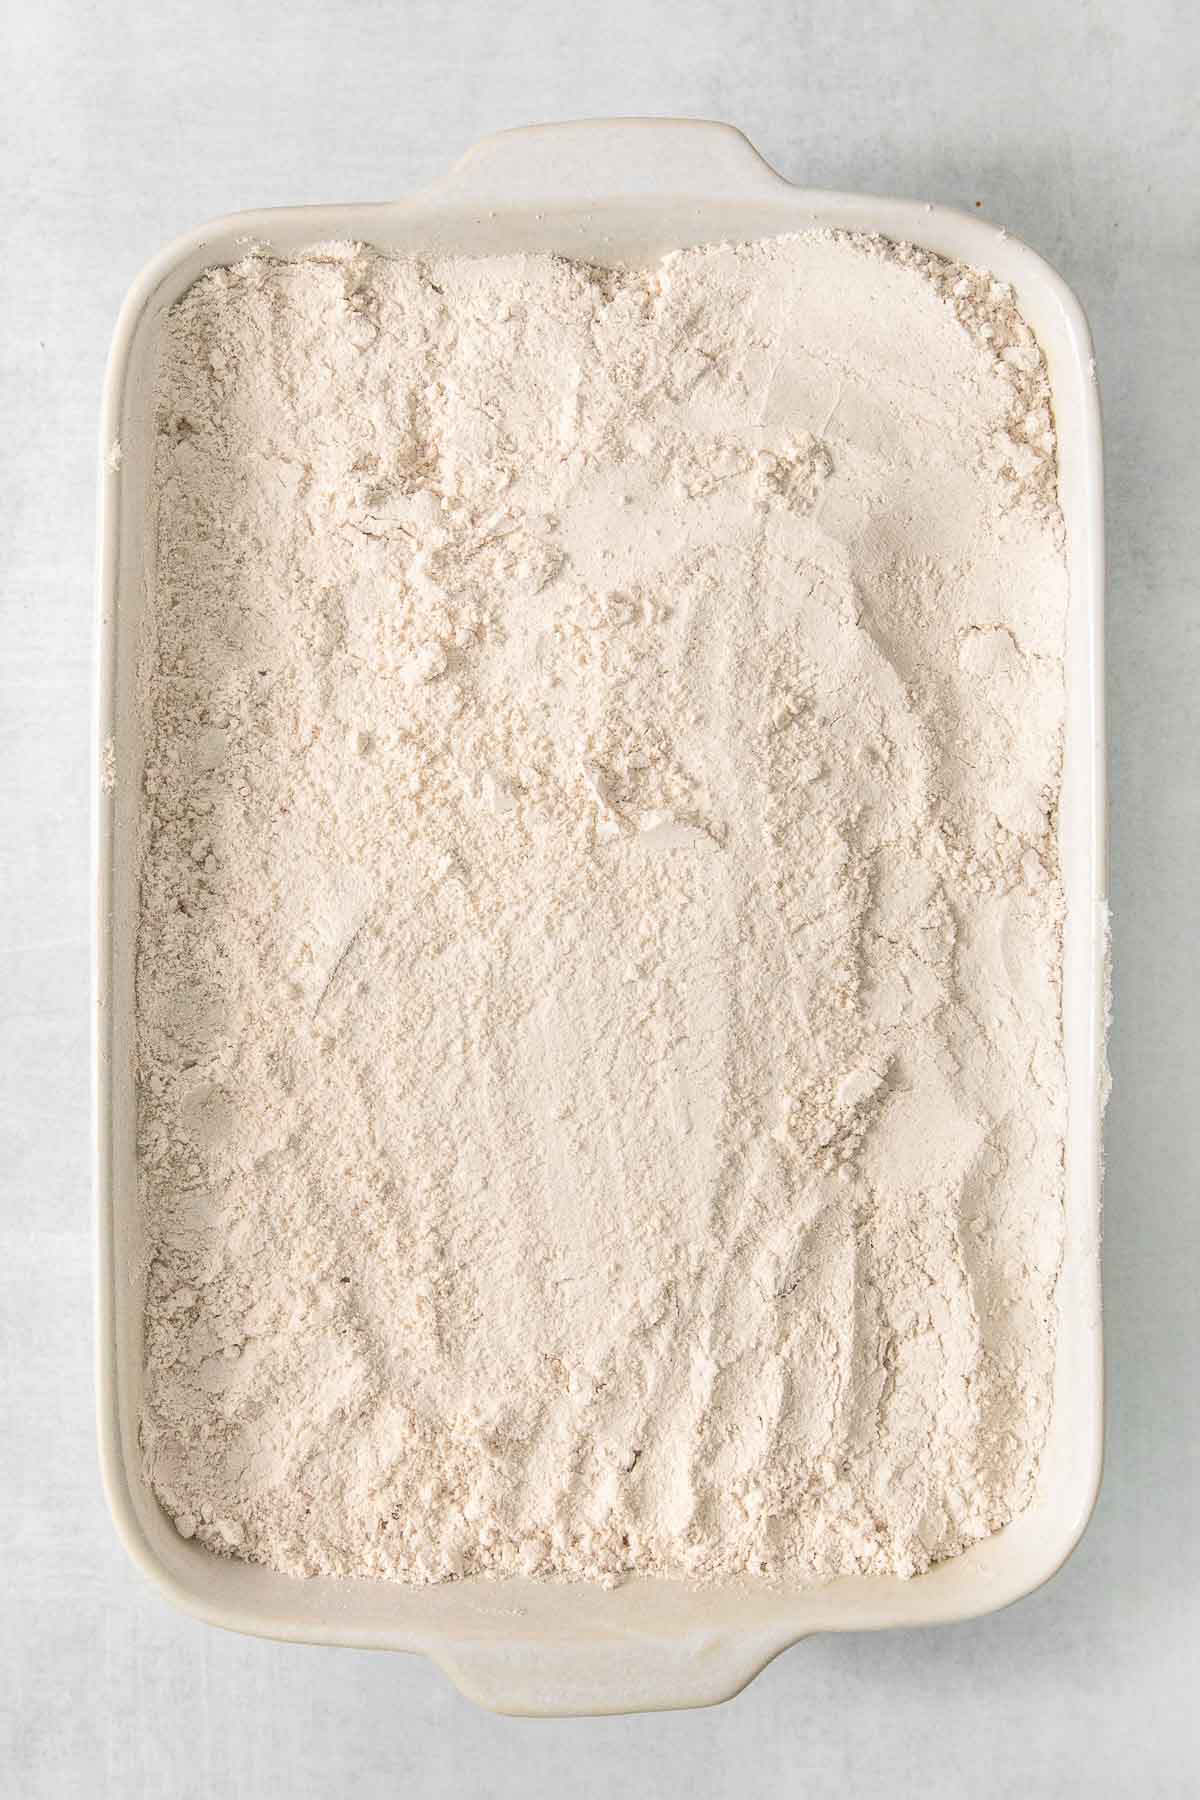 A white baking dish filled with dry cake mix.